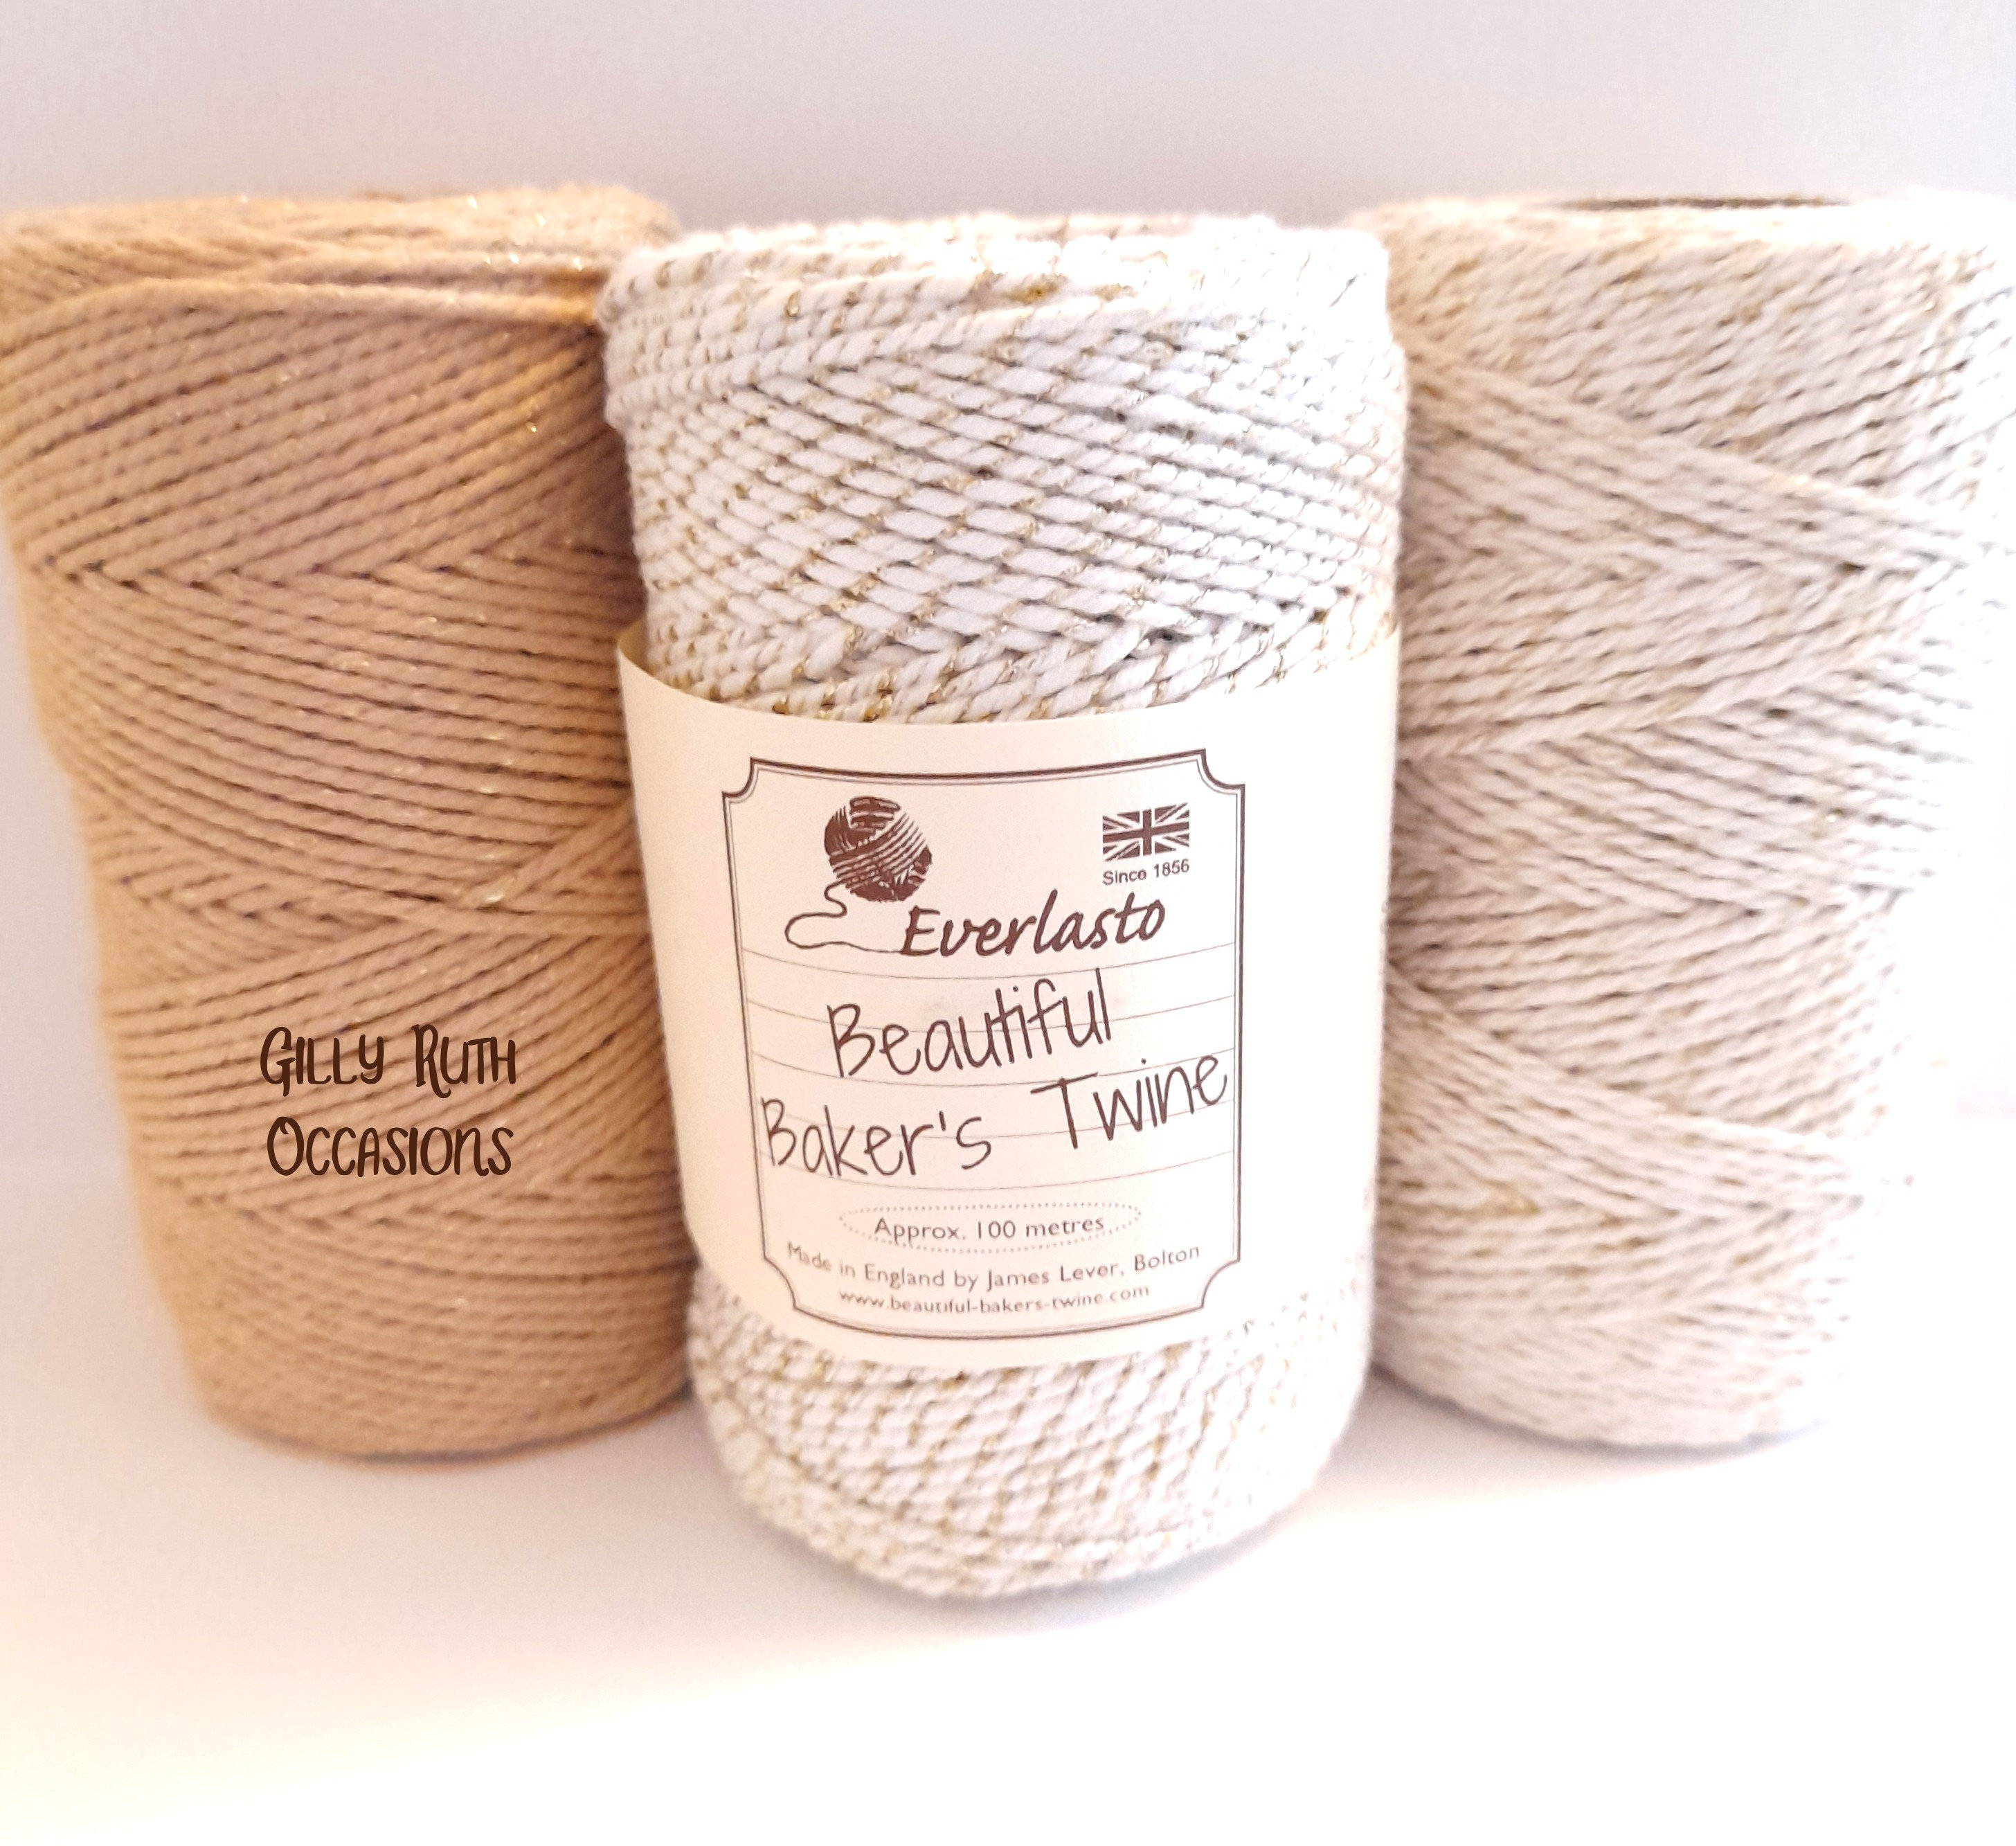 16 Ply White Cotton Butcher Twine String Rope 2,520 Feet 840 Yard Craft  String Cone 1.9 Lbs, Baker's Twine 